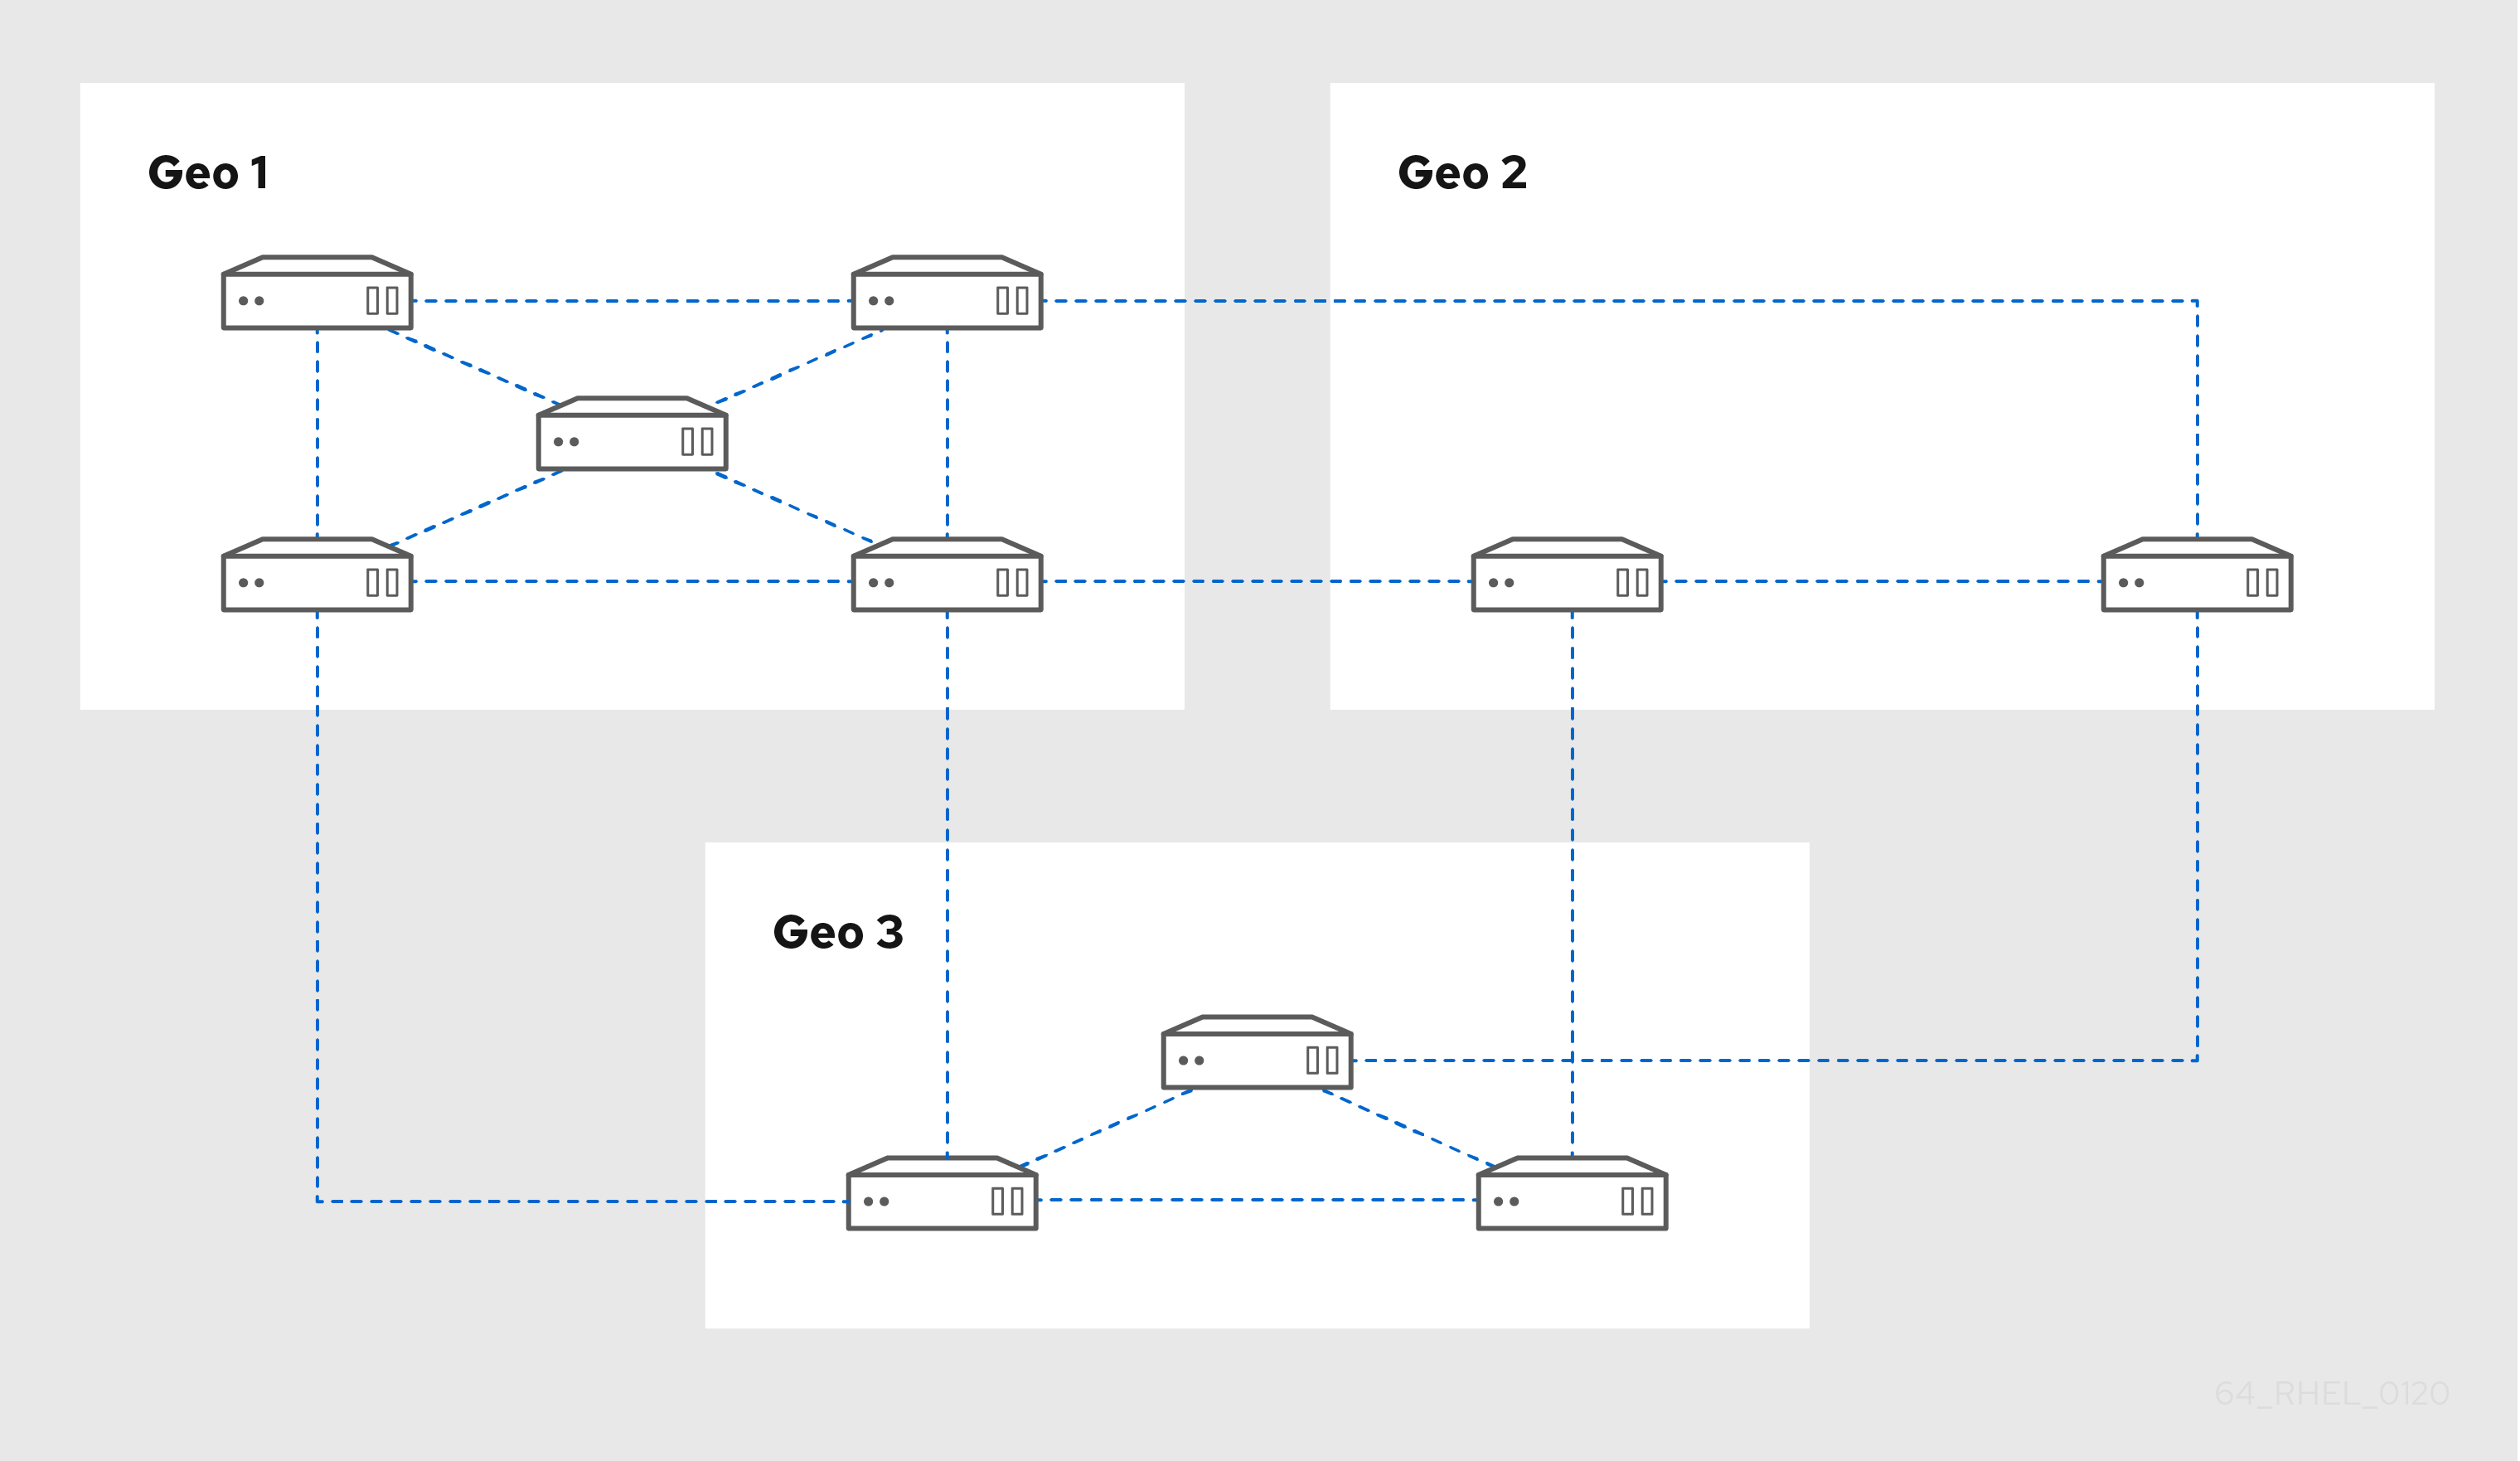 A diagram showing 3 data centers: Geo 1 has 5 servers each connected to the other - Geo 2 has two servers connected to each other - Geo 3 has 3 servers connected in a triangle. There are 2 connections from each Geo connecting two of its servers to 2 servers in the next Geo.